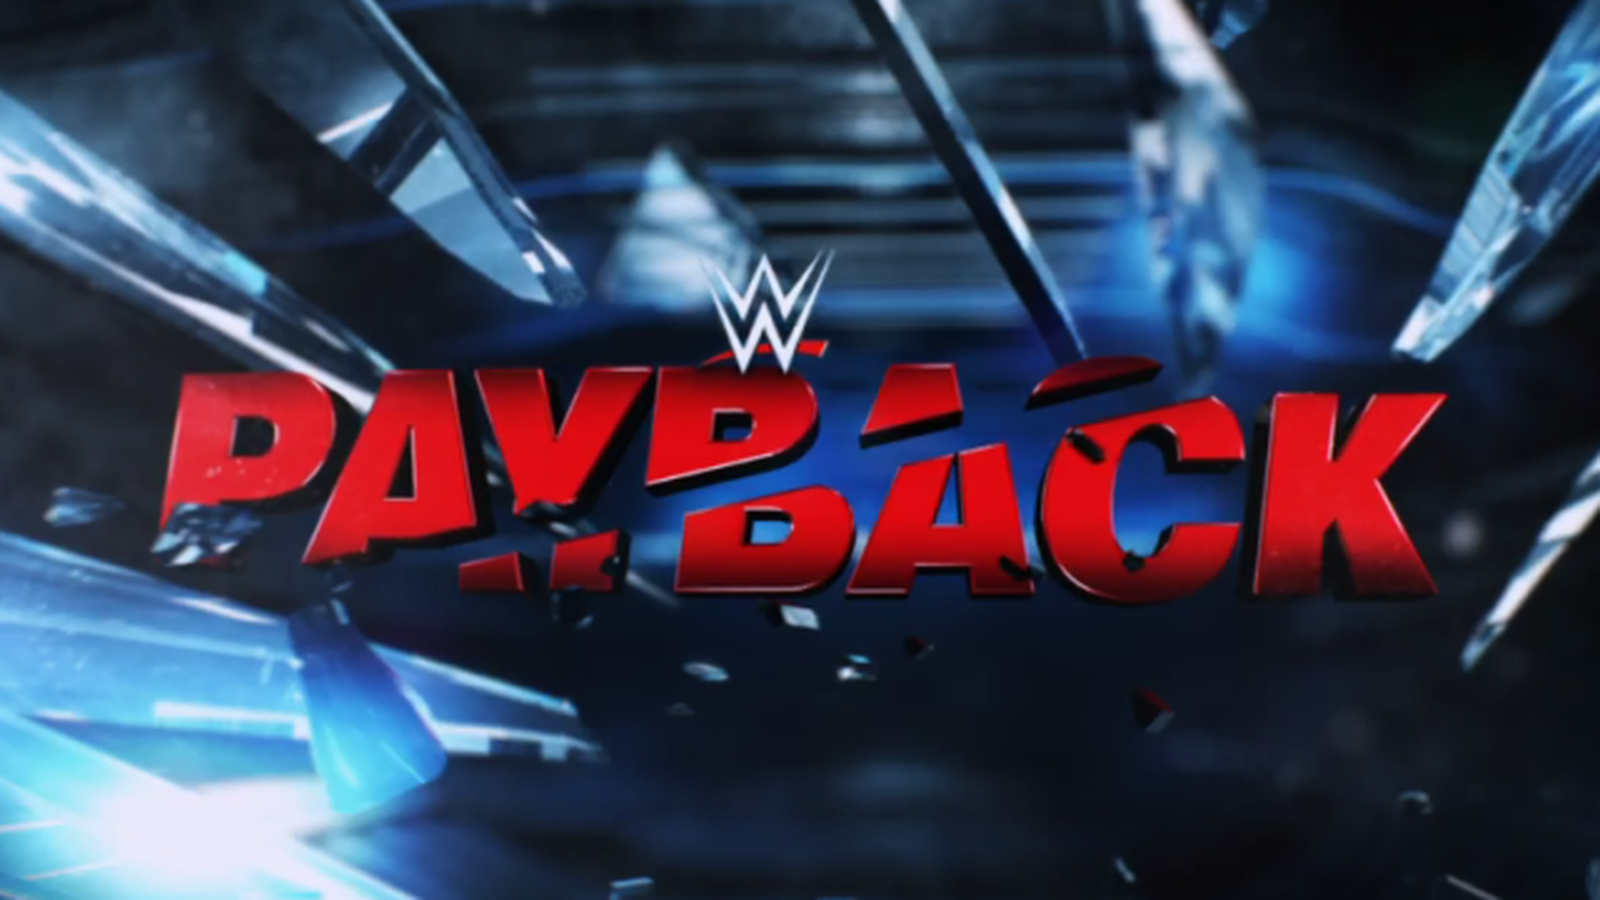 WWE Payback 2016 Wallpapers HD Pictures | Live HD Wallpaper HQ ...